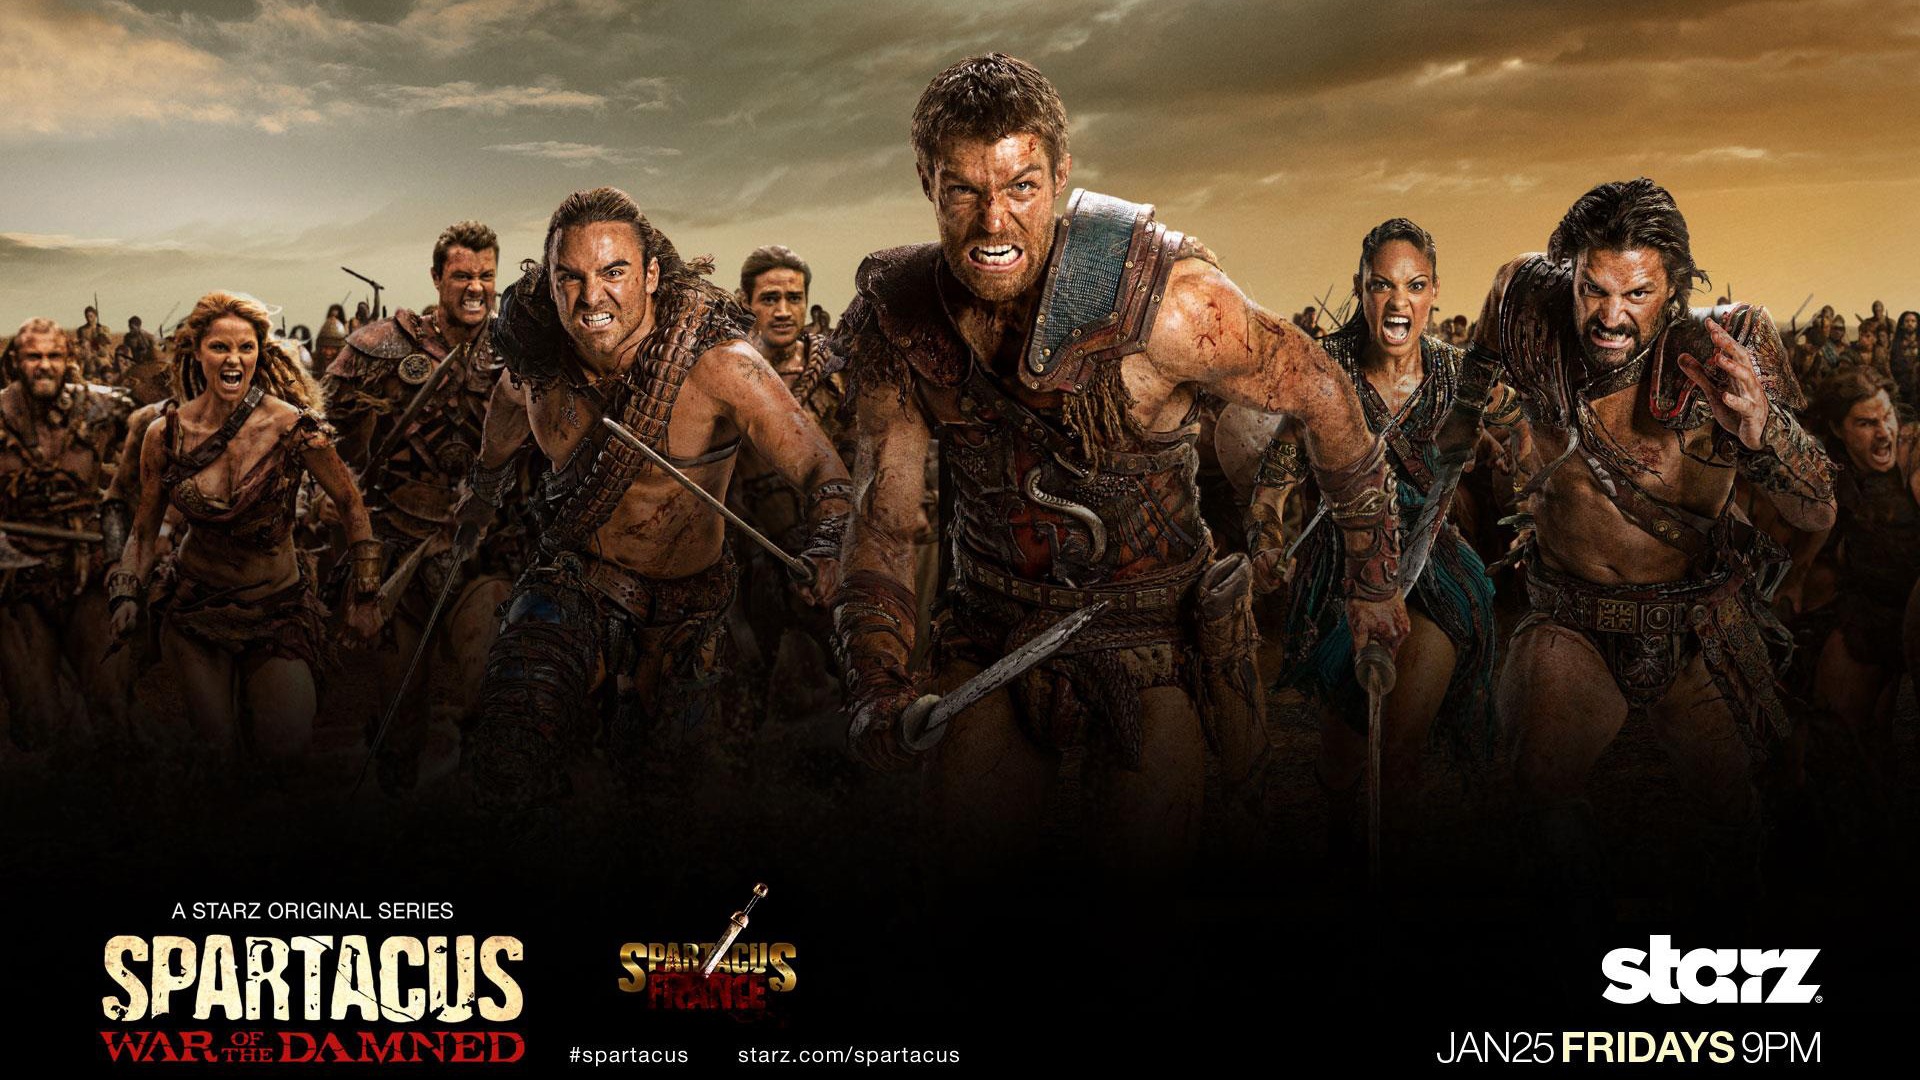 Spartacus: War of the Damned HD wallpapers #1 - 1920x1080